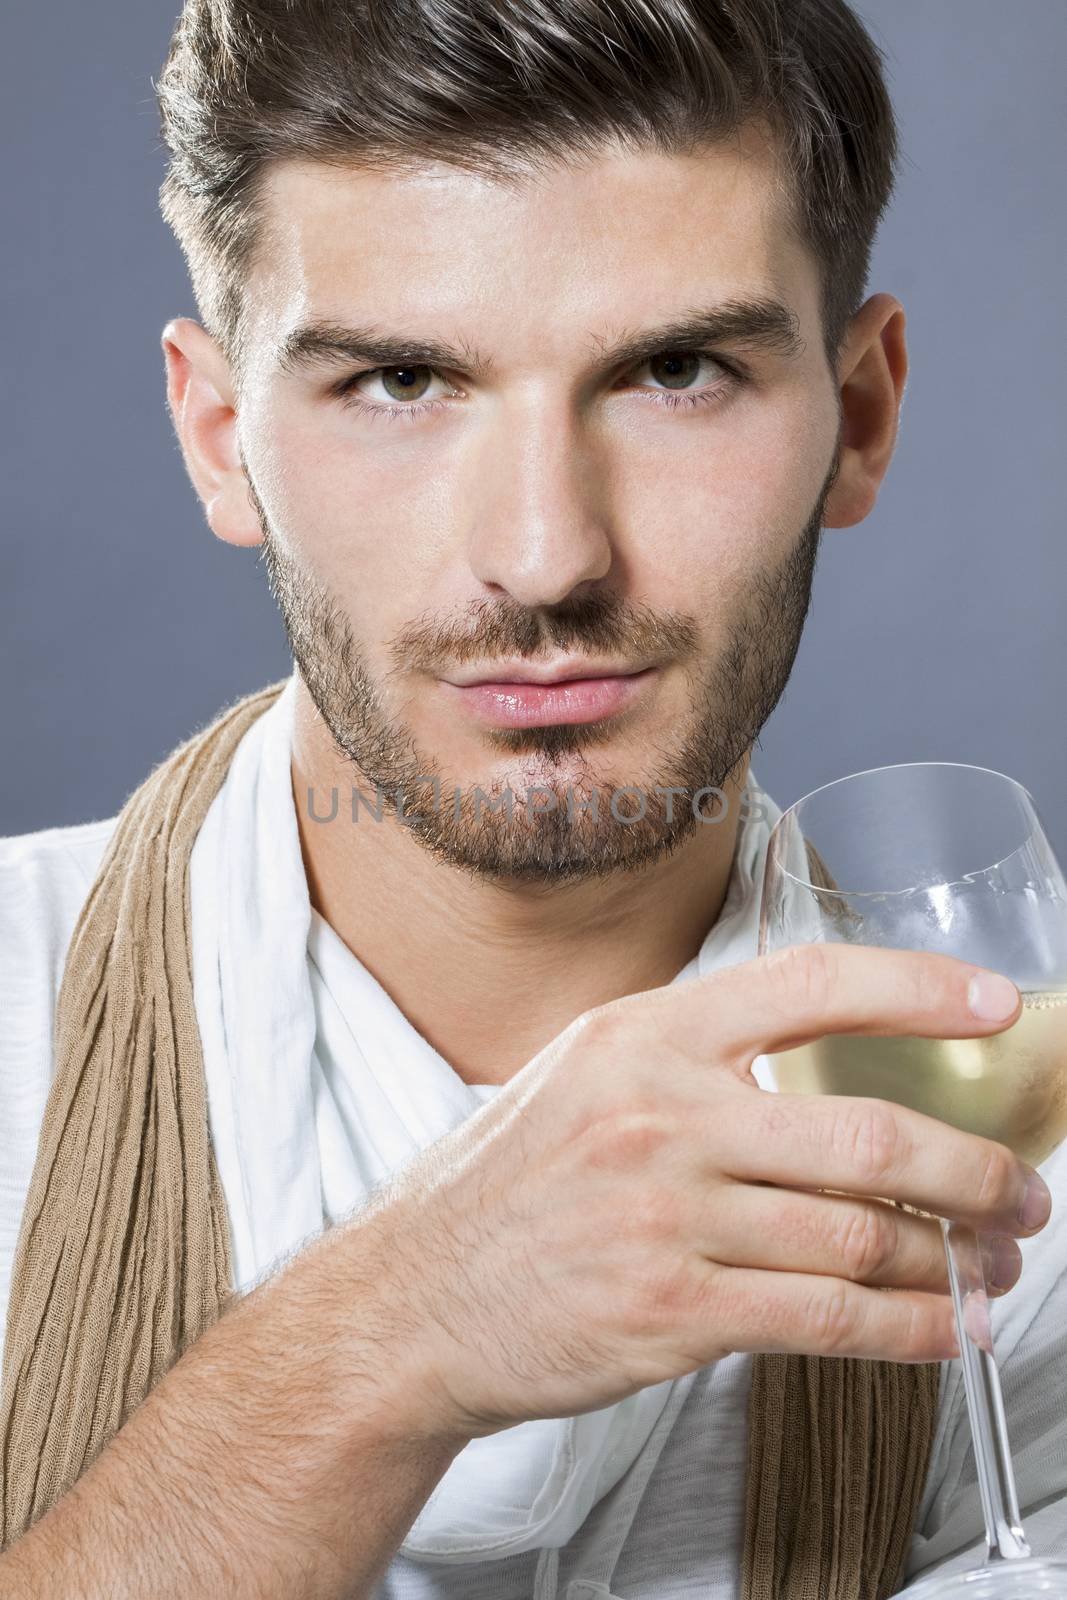 Sexy handsome young man with a beard wearing an elegant scarf drinking white wine and looking at the camera with a serious intense expression